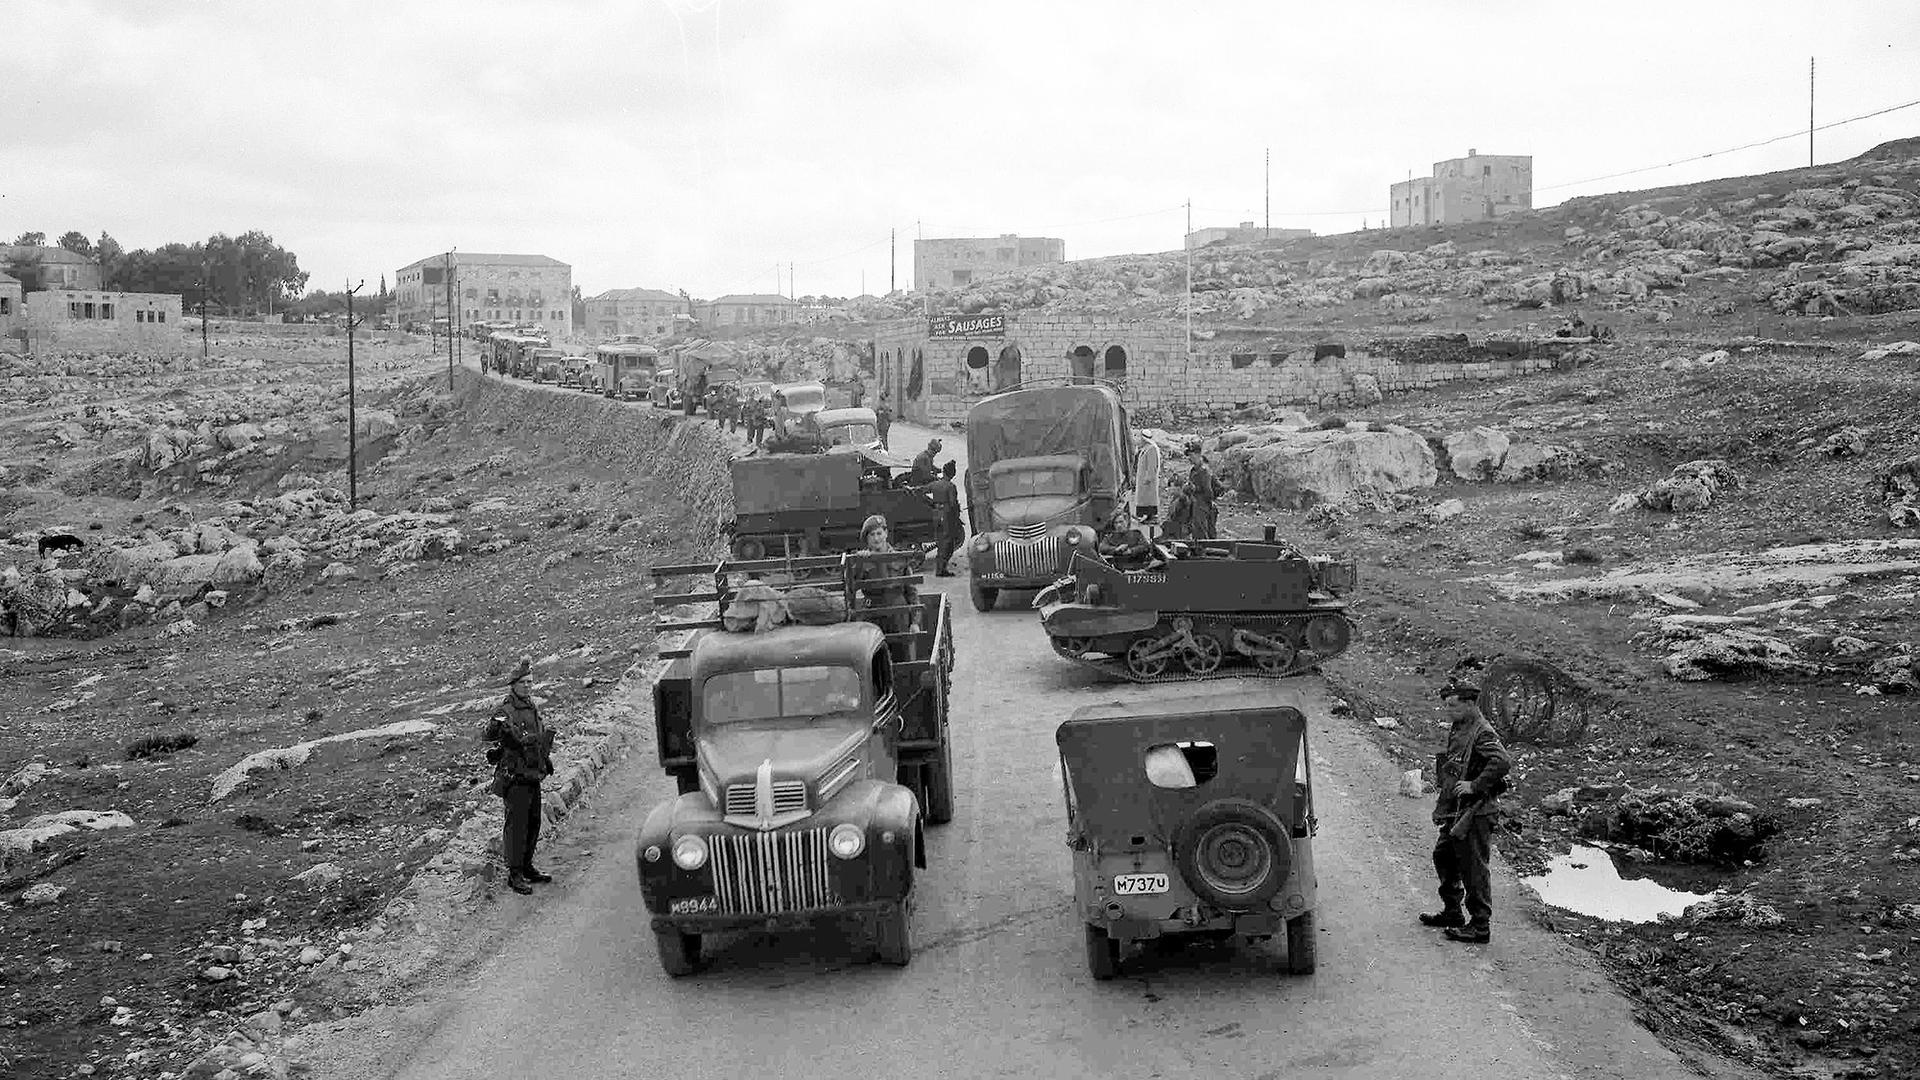 A line of vehicles, stretching for almost a mile, waits to pass through a road block on the main road from Jerusalem to Tel Aviv, Feb. 6, 1947. The road block is manned by members of the Royal Irish Fusiliers. 